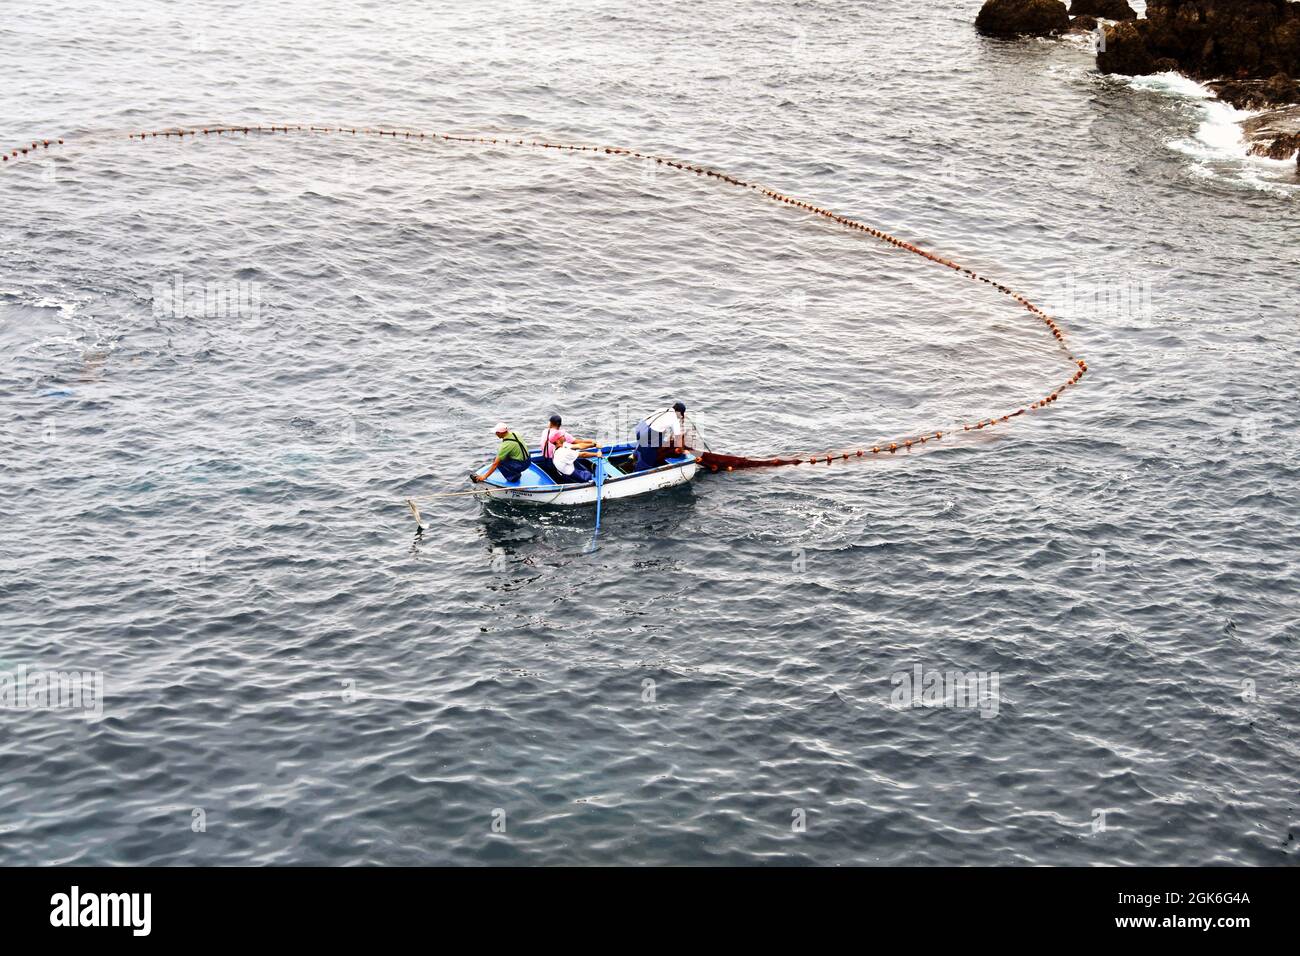 Madeira, Portugal - February 2016: Fishermen on a small rowing boat hauling in a heavy fishing net Stock Photo